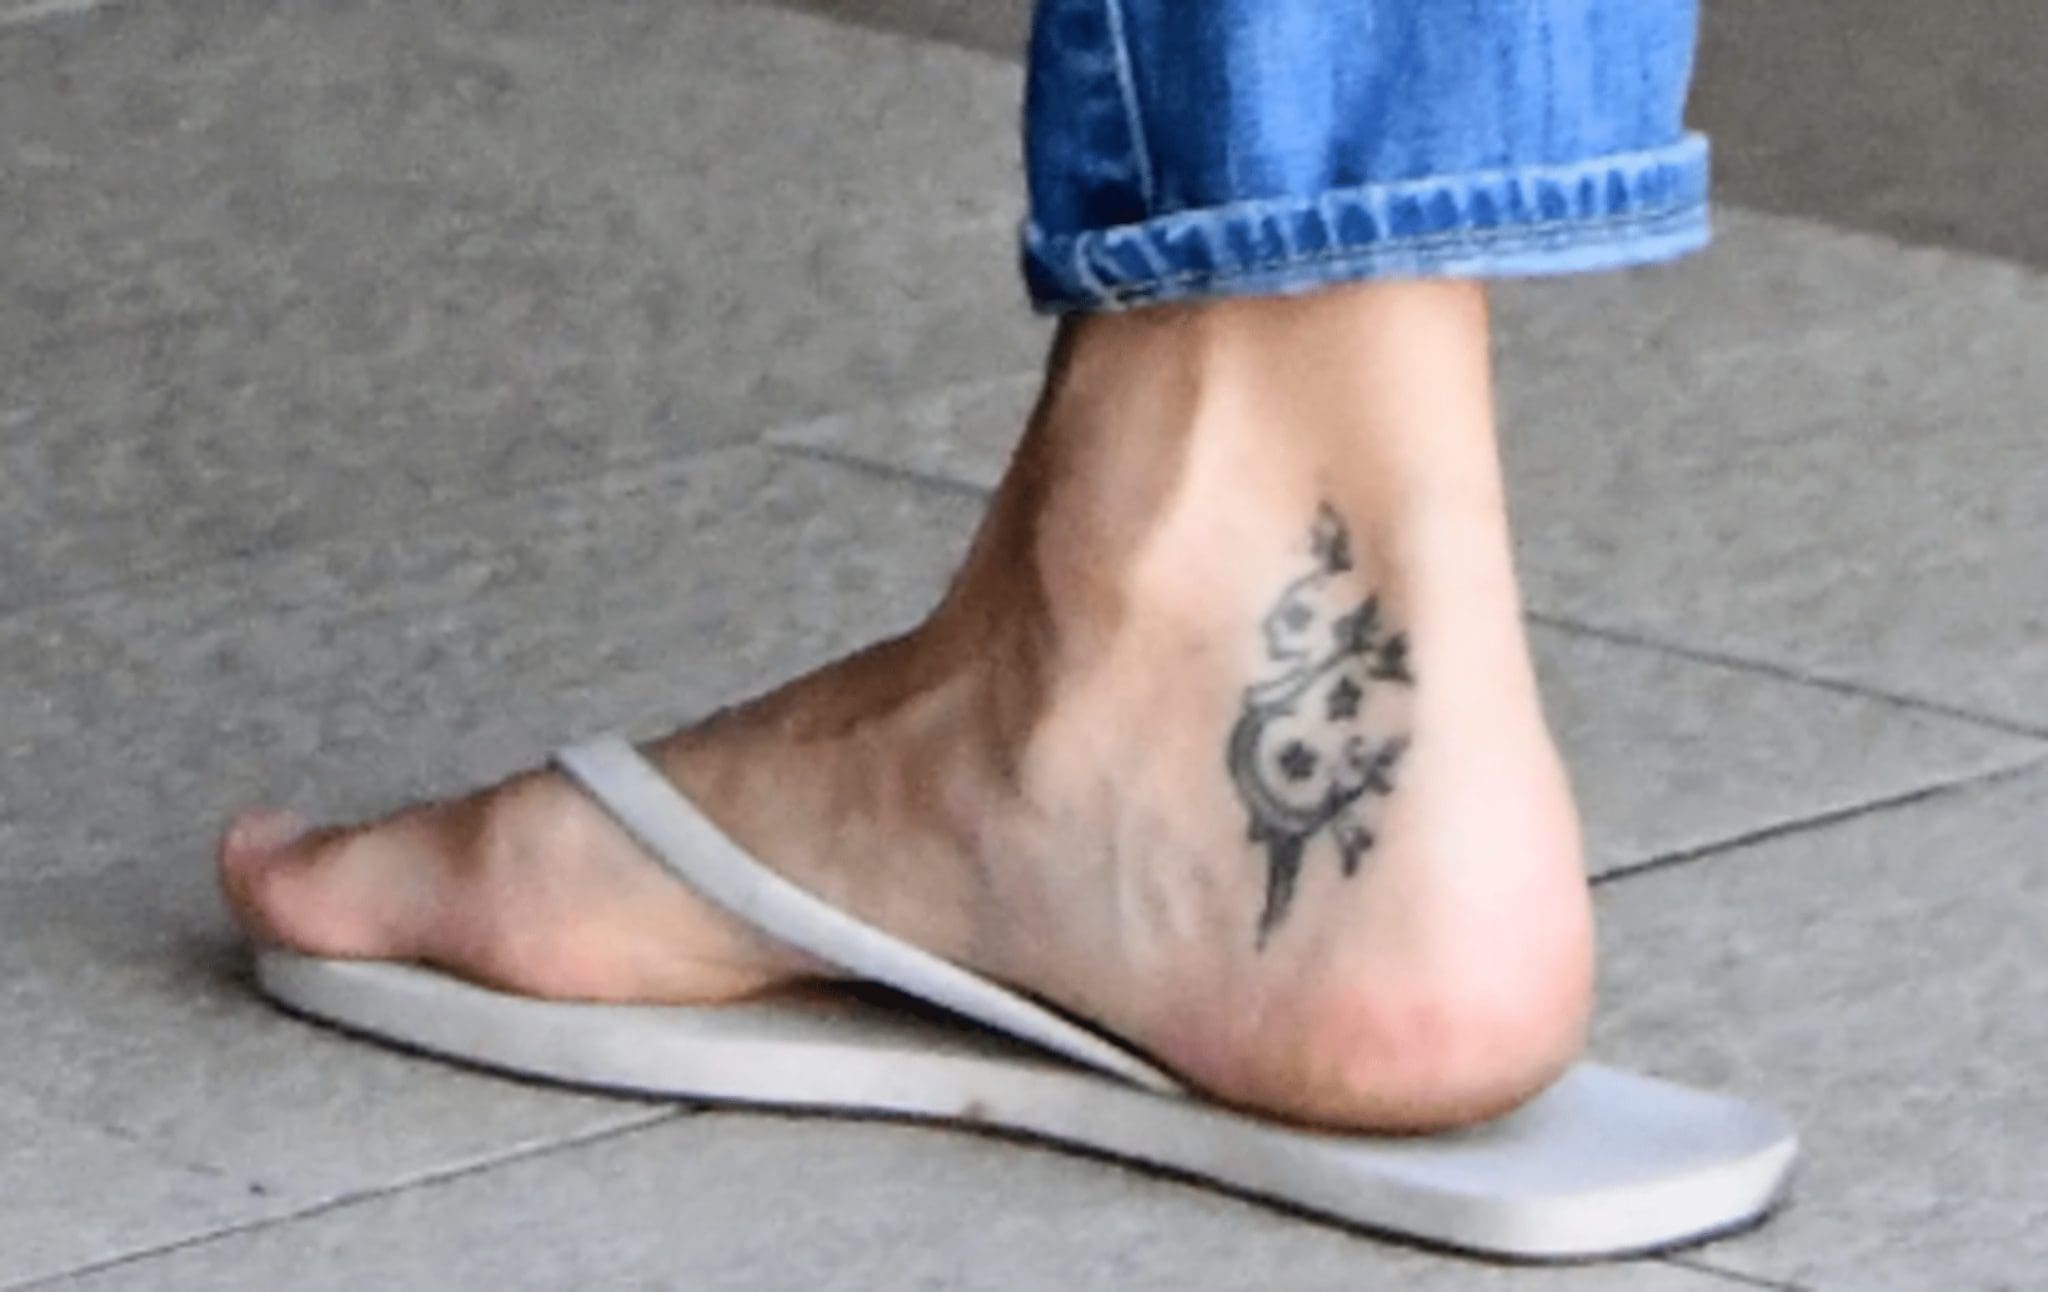 A Closer Look Reveals That Gisele Bündchen's Foot Tattoo Has Been Altered